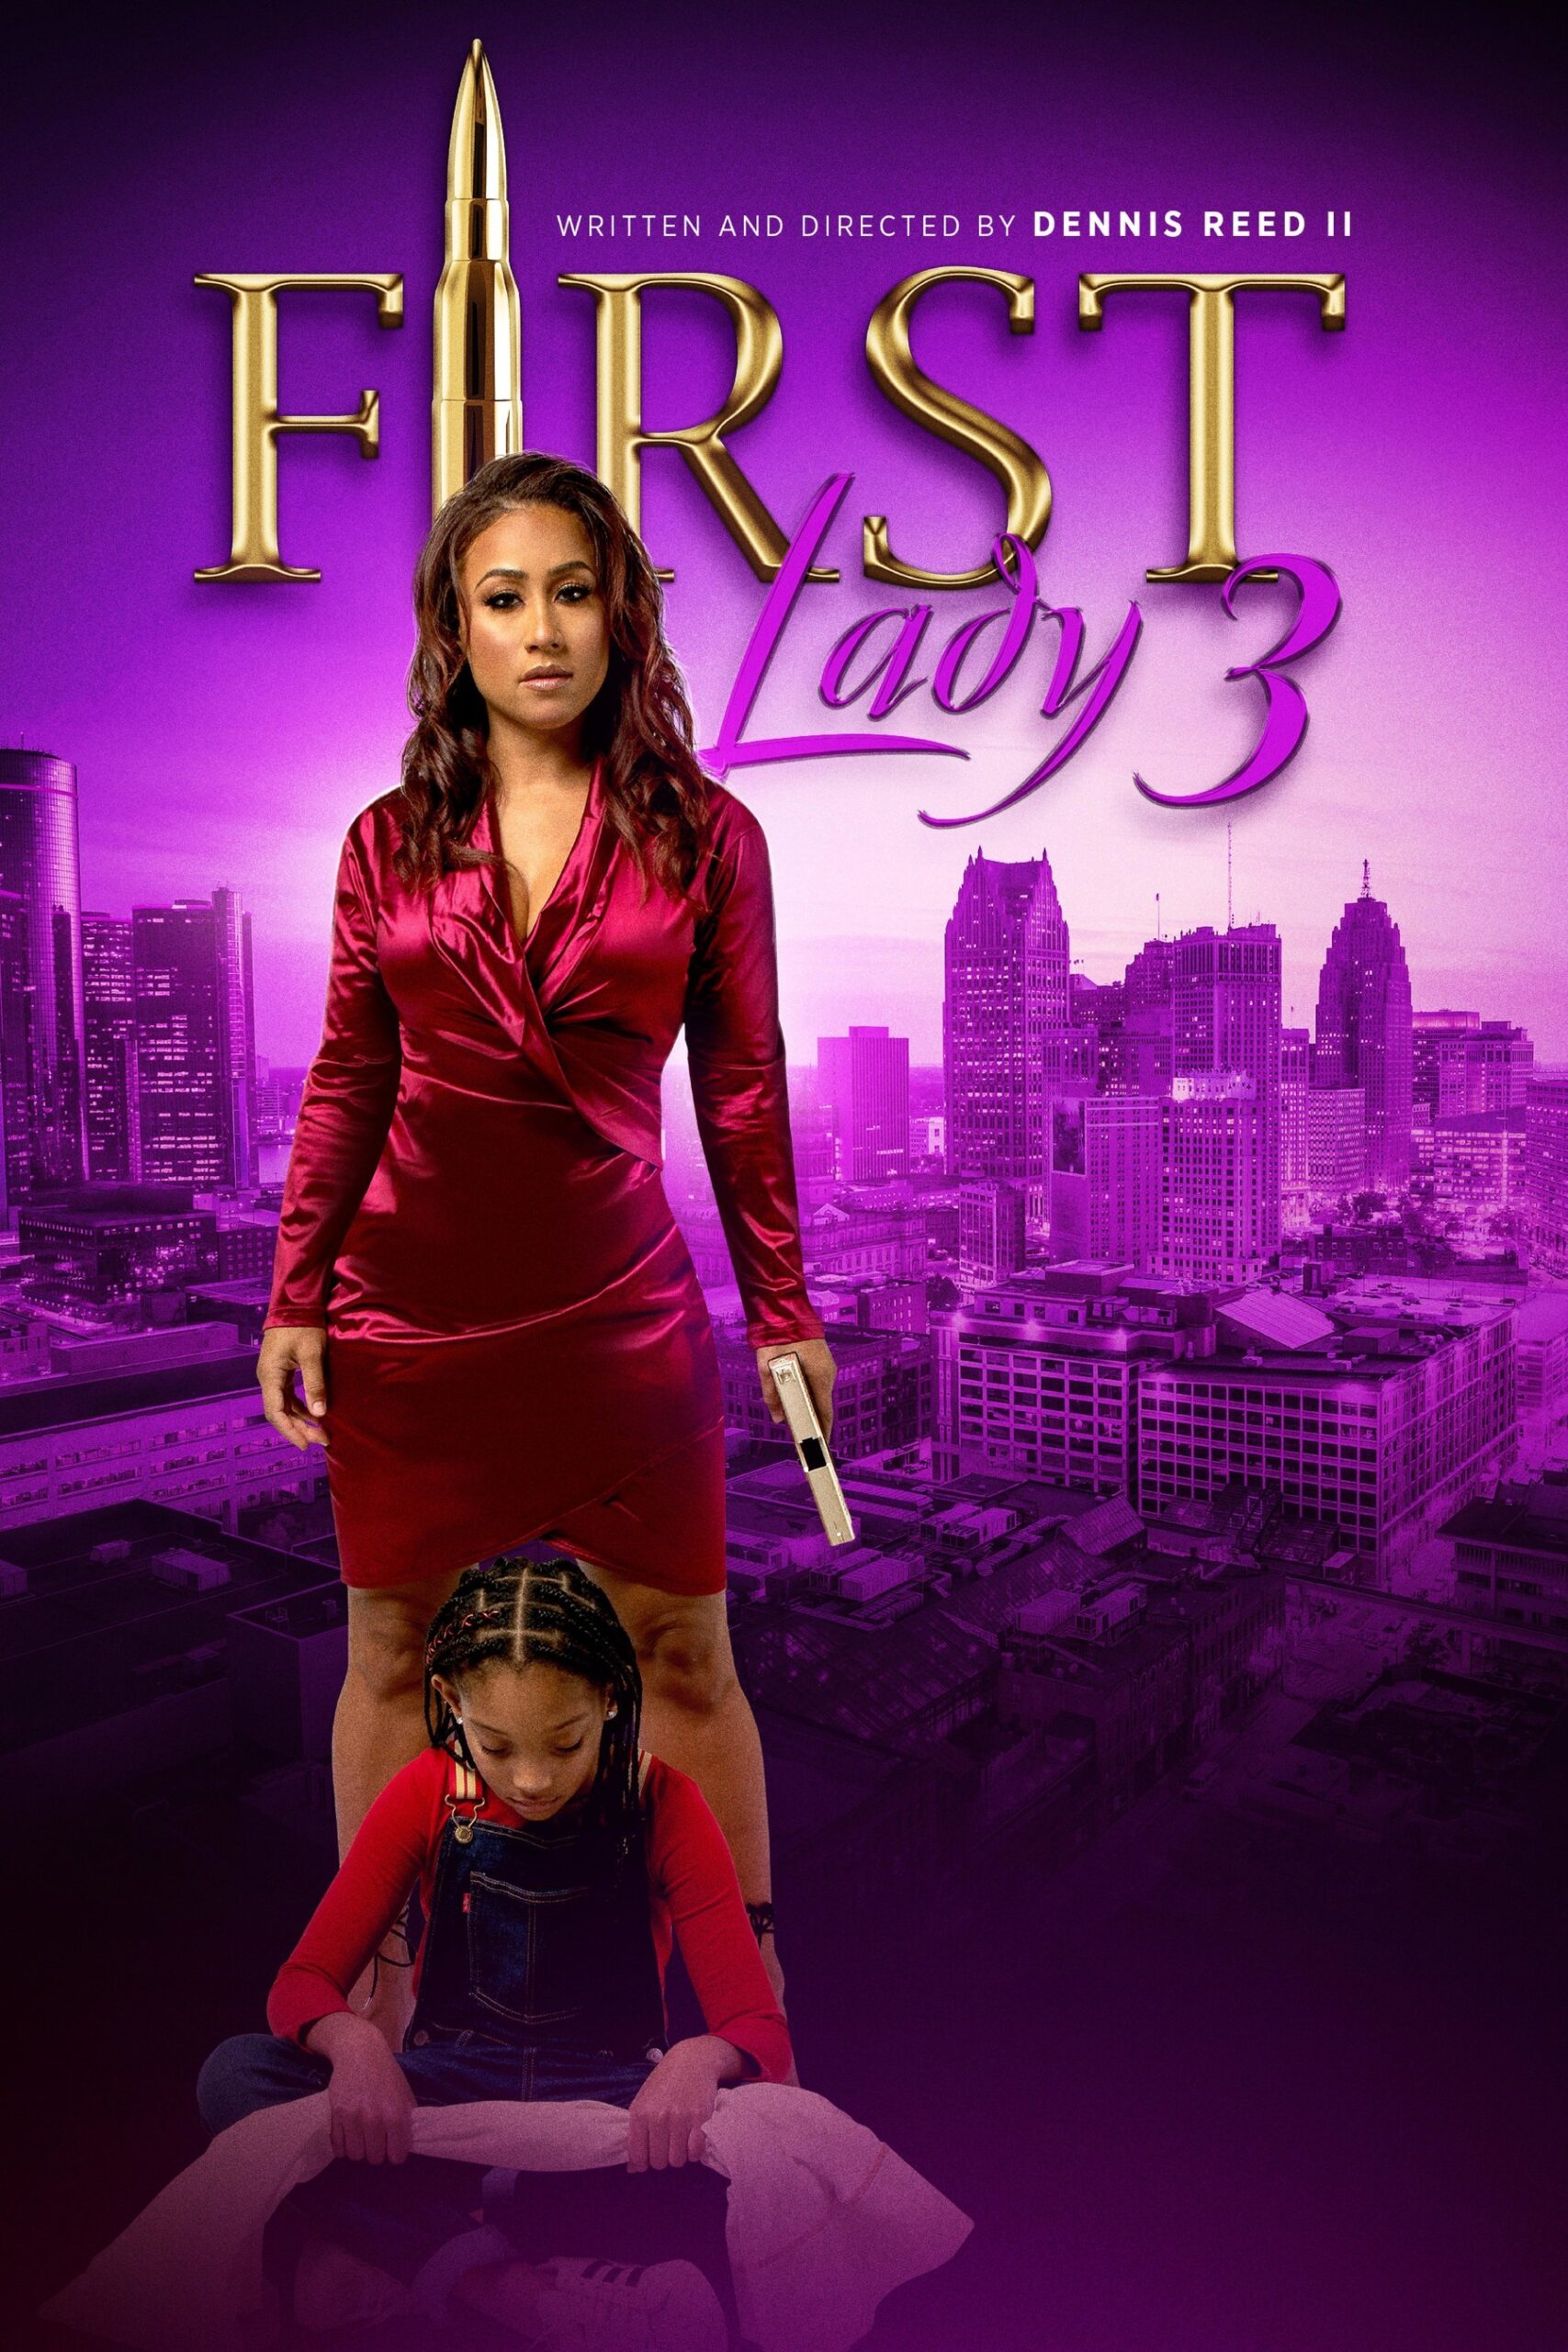 First Lady 3